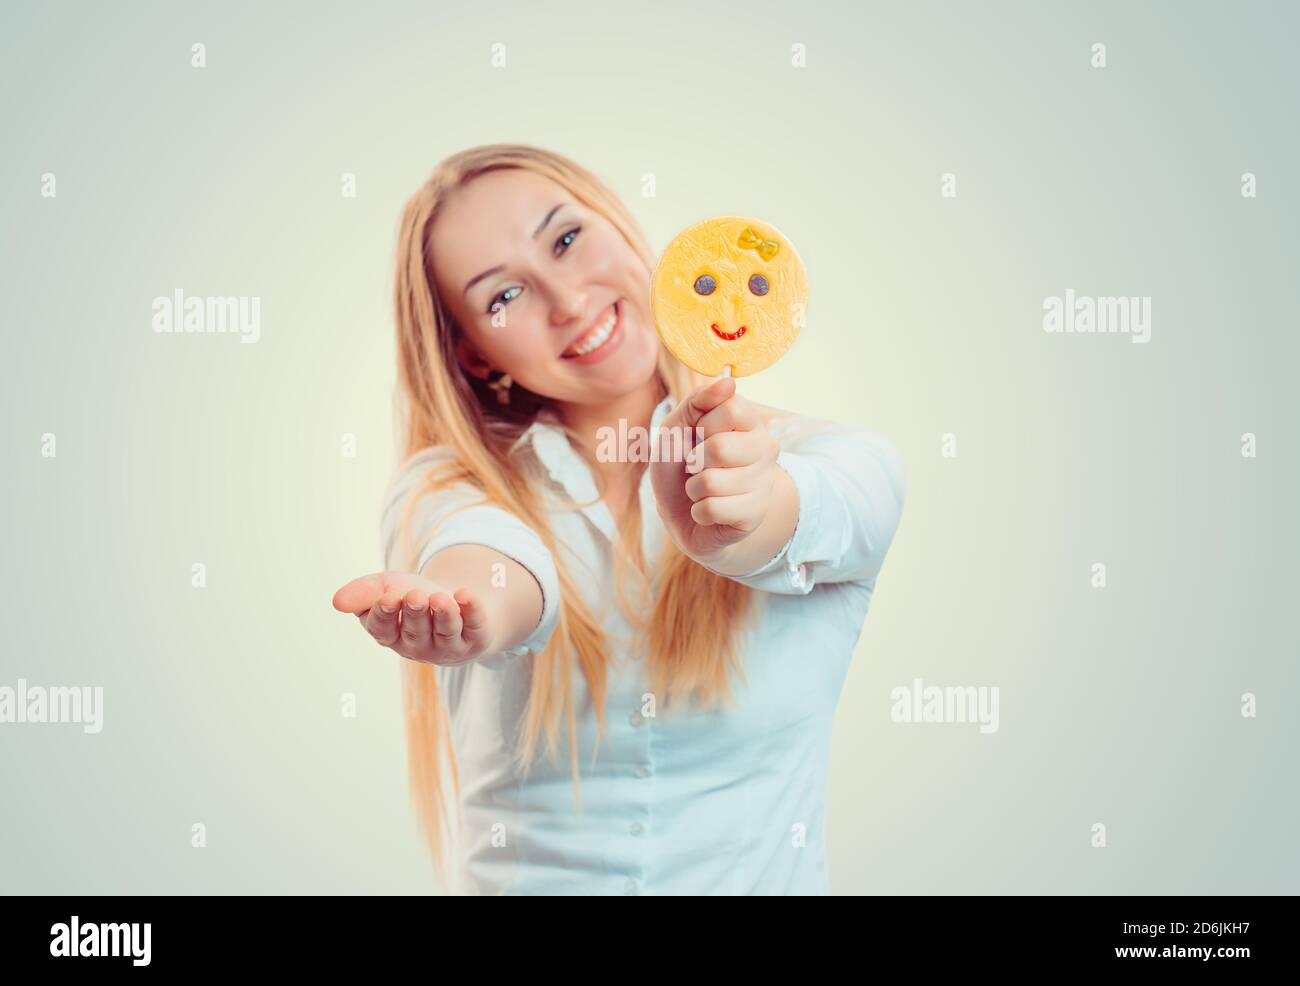 Bright blond woman proposing giving candy stick with emoji lollipop smiling at camera isolated on light green yellow background with copy space. Blur Stock Photo